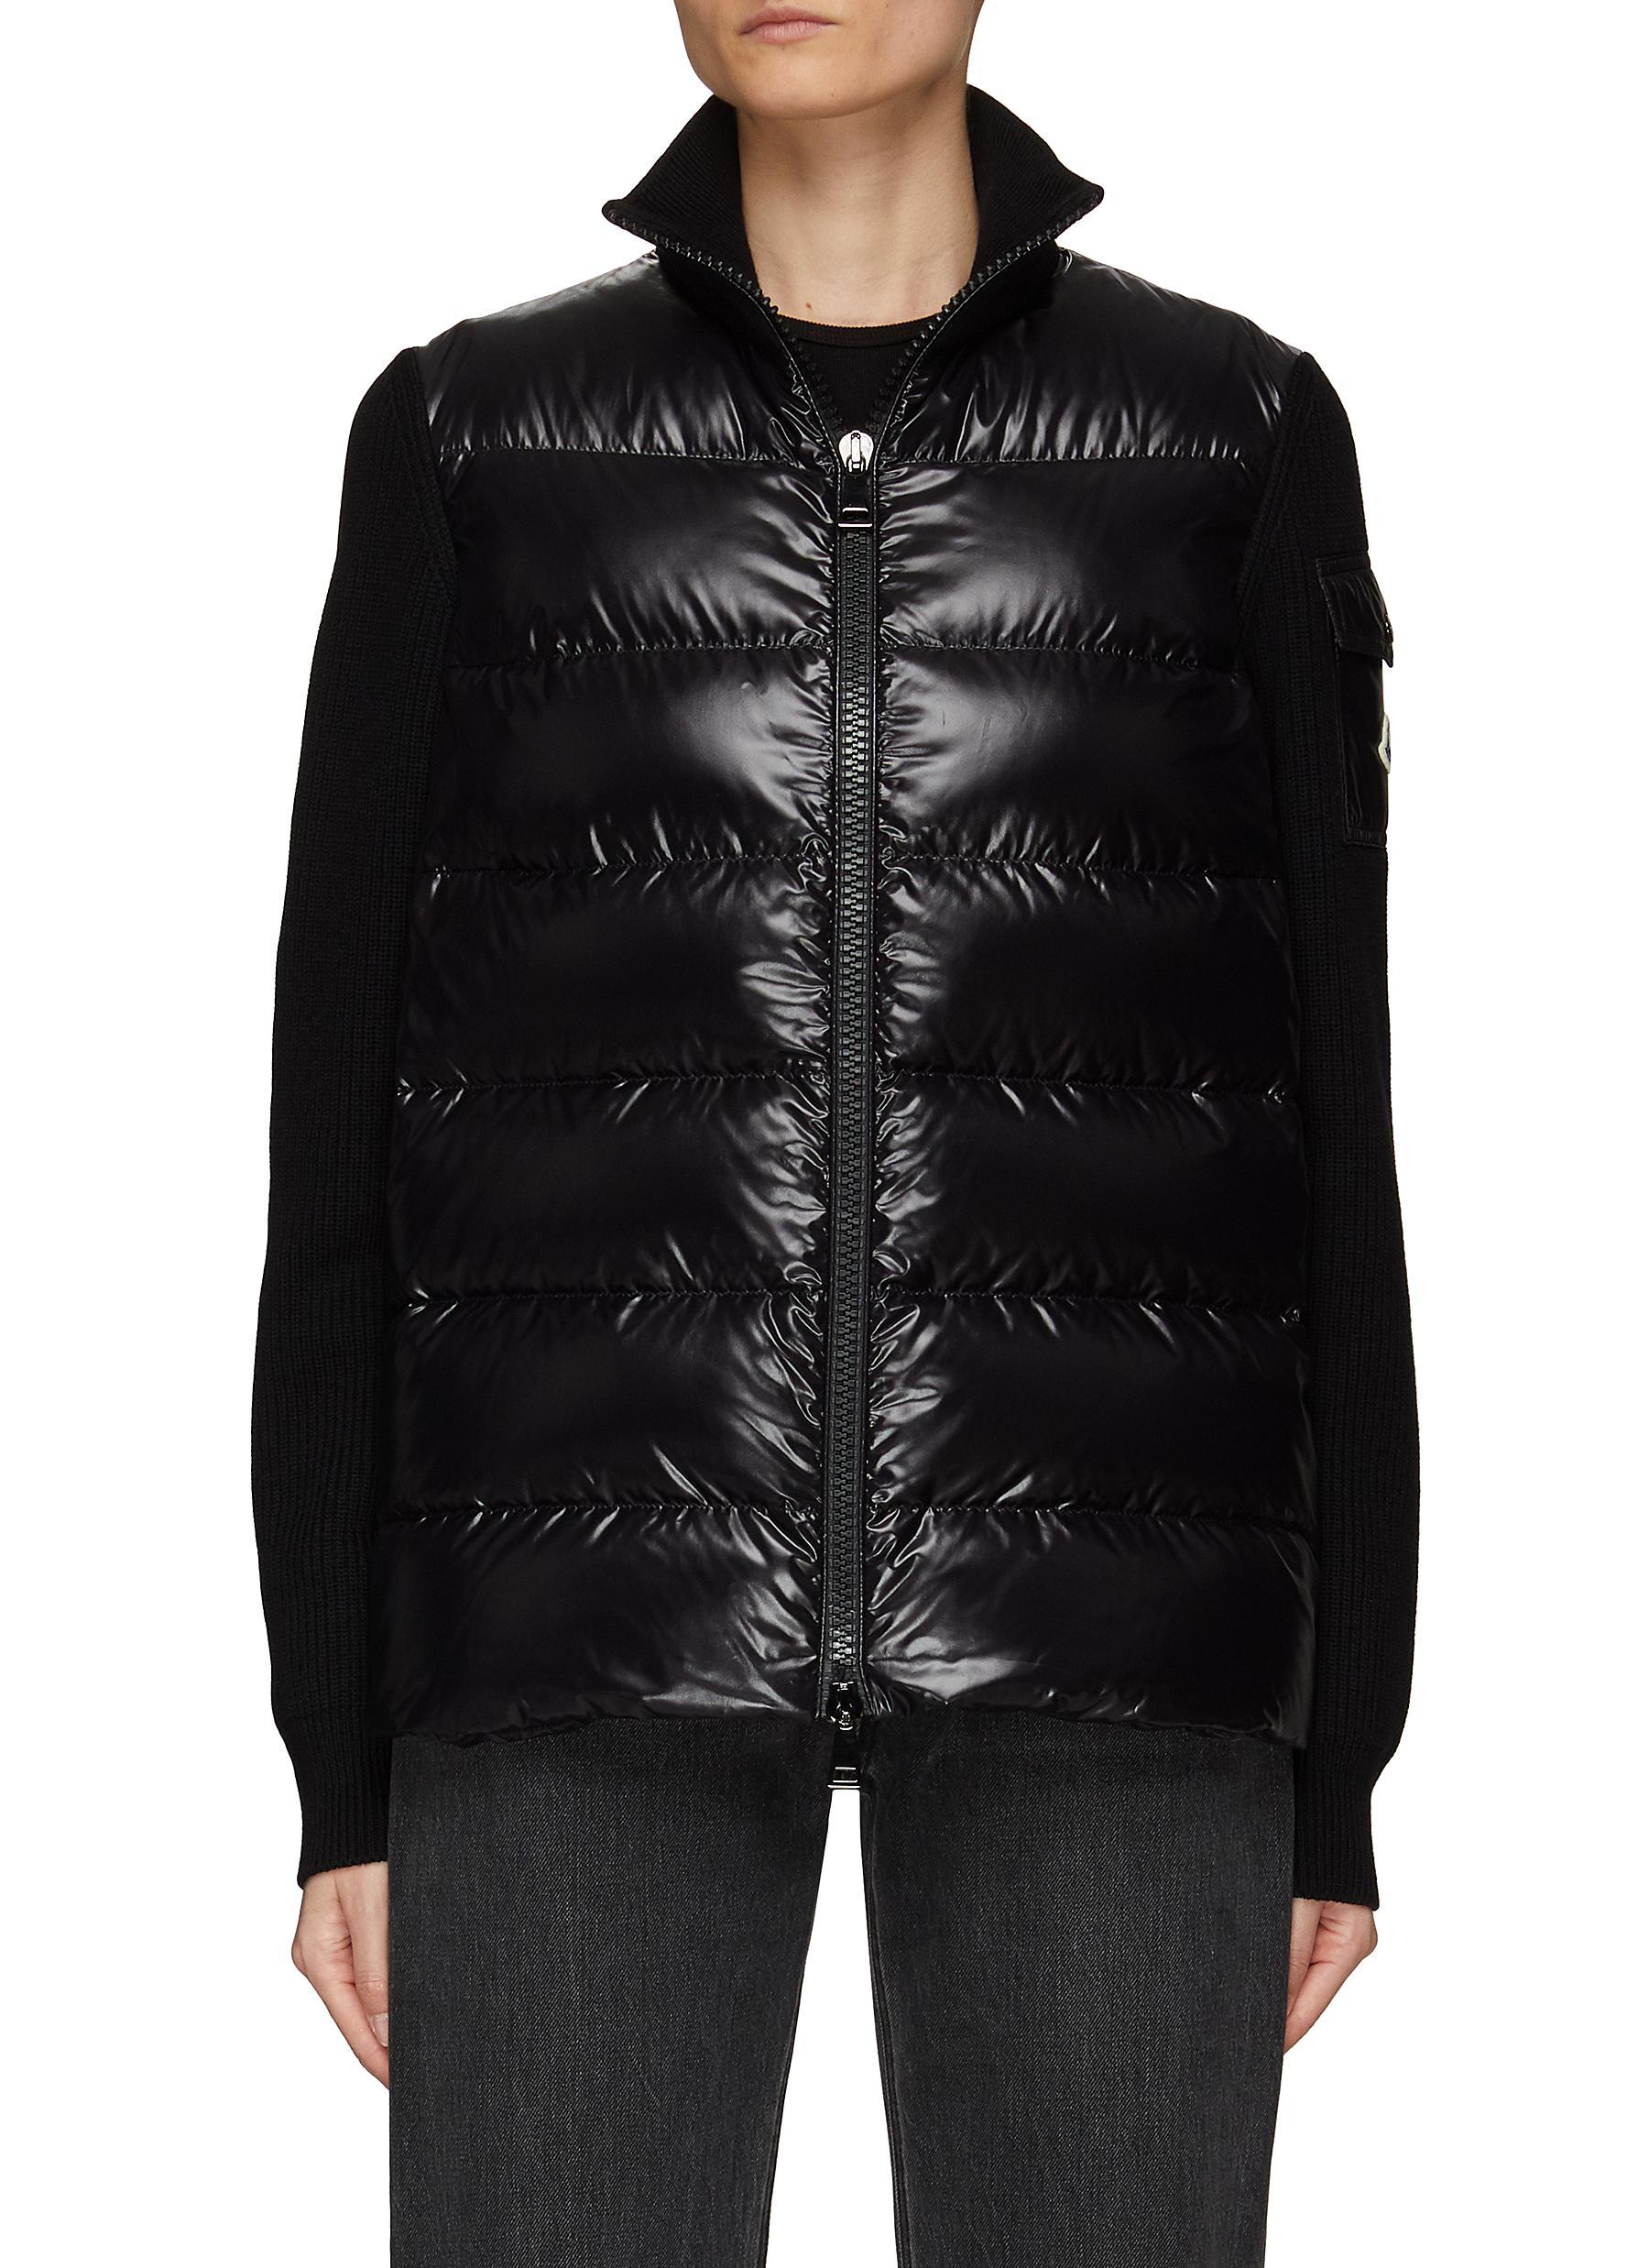 Moncler Long Sleeve Zipped Up Puffer Cardigan in Black | Lyst